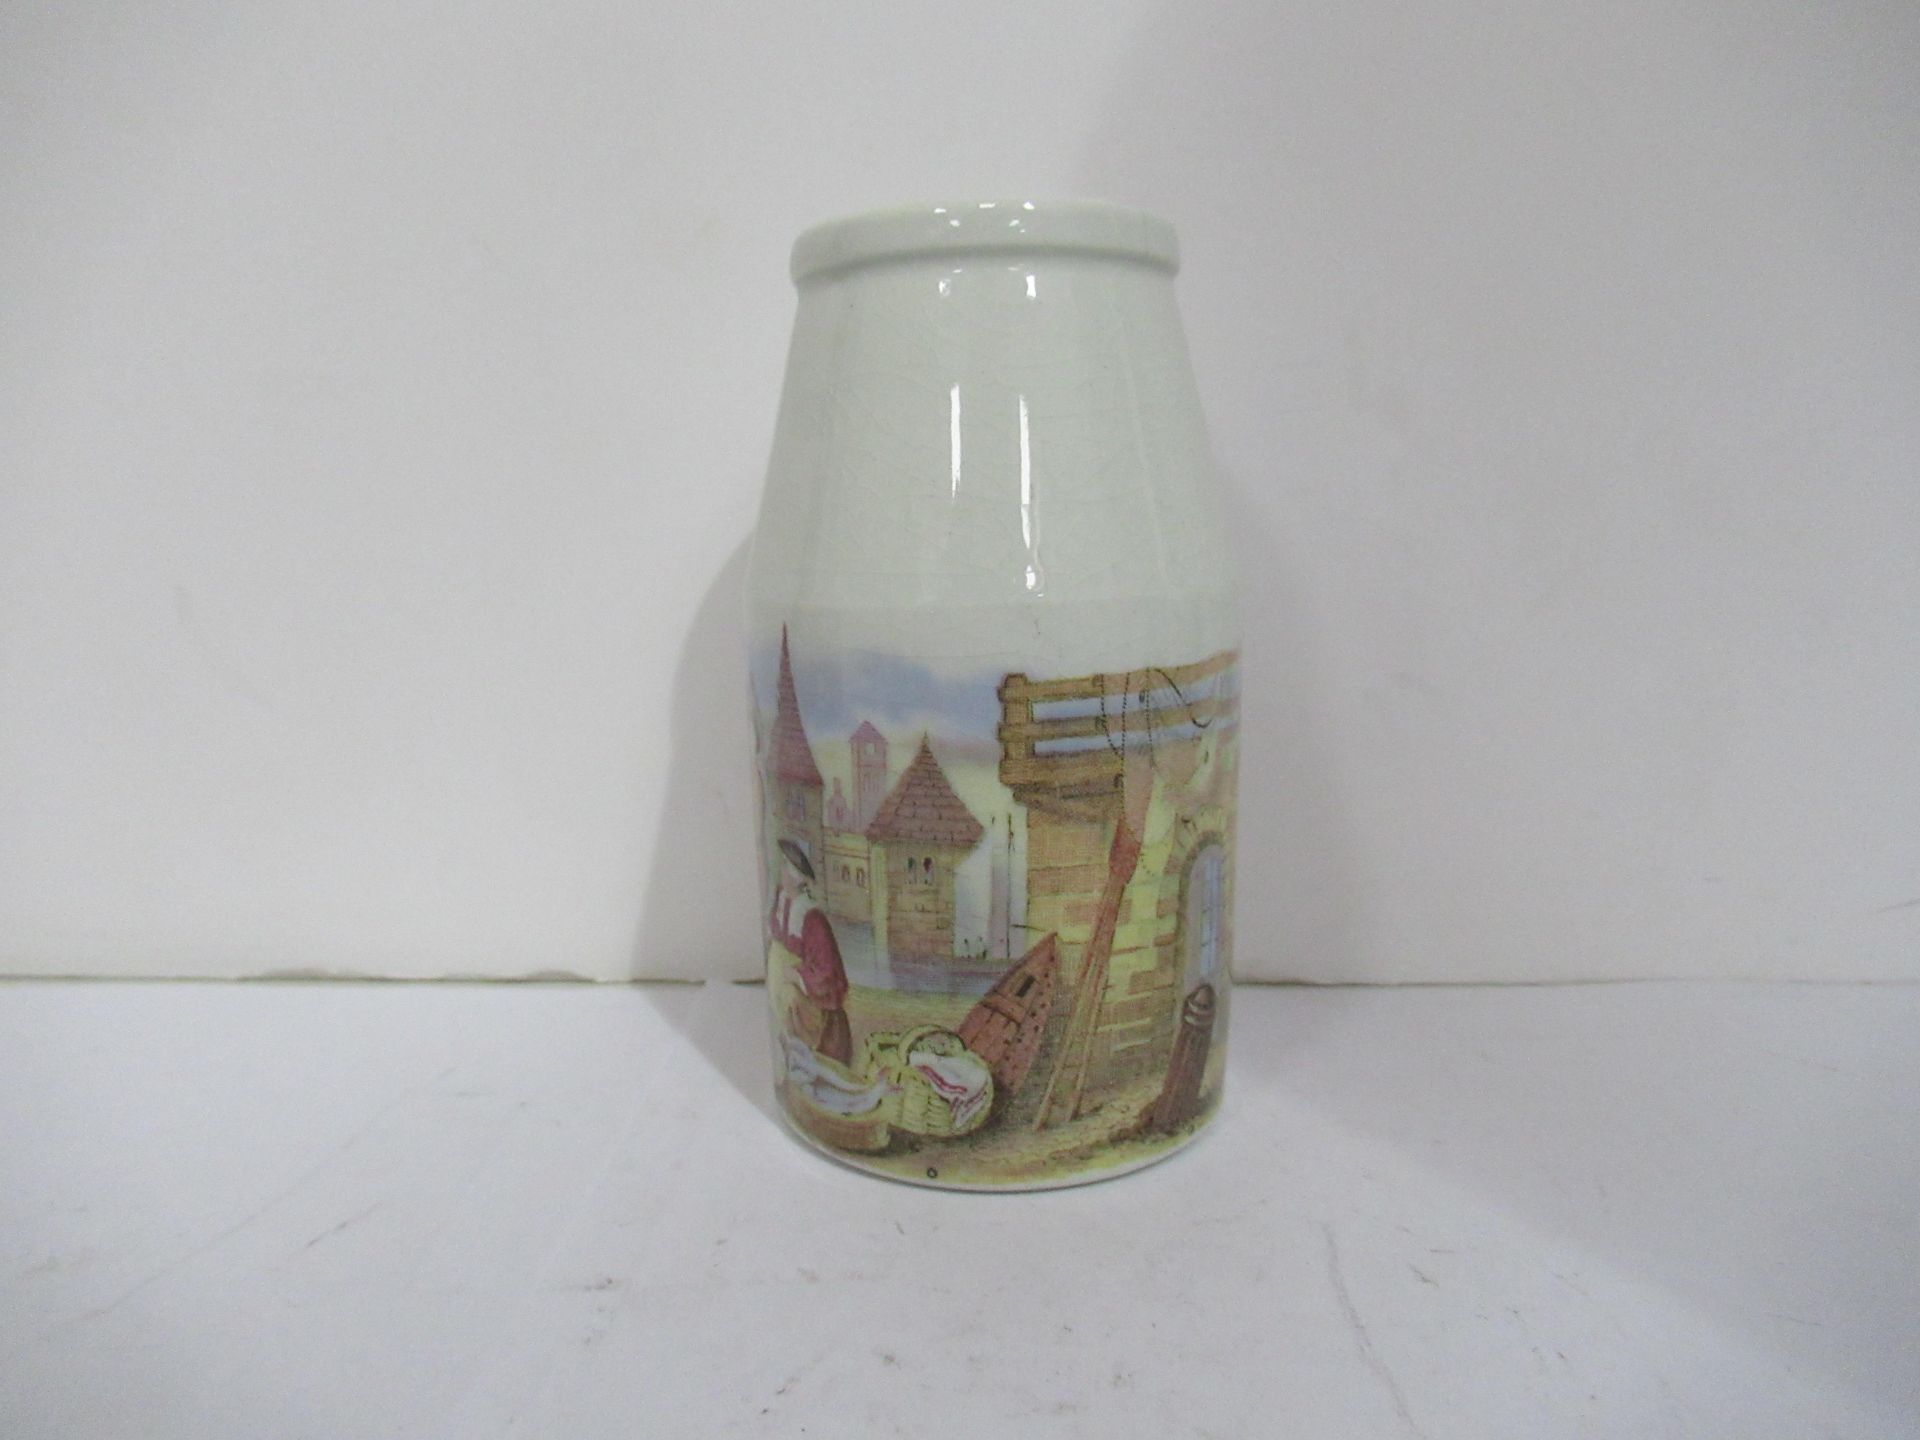 6x Prattware painted jars including one depicting Venice - Image 23 of 42